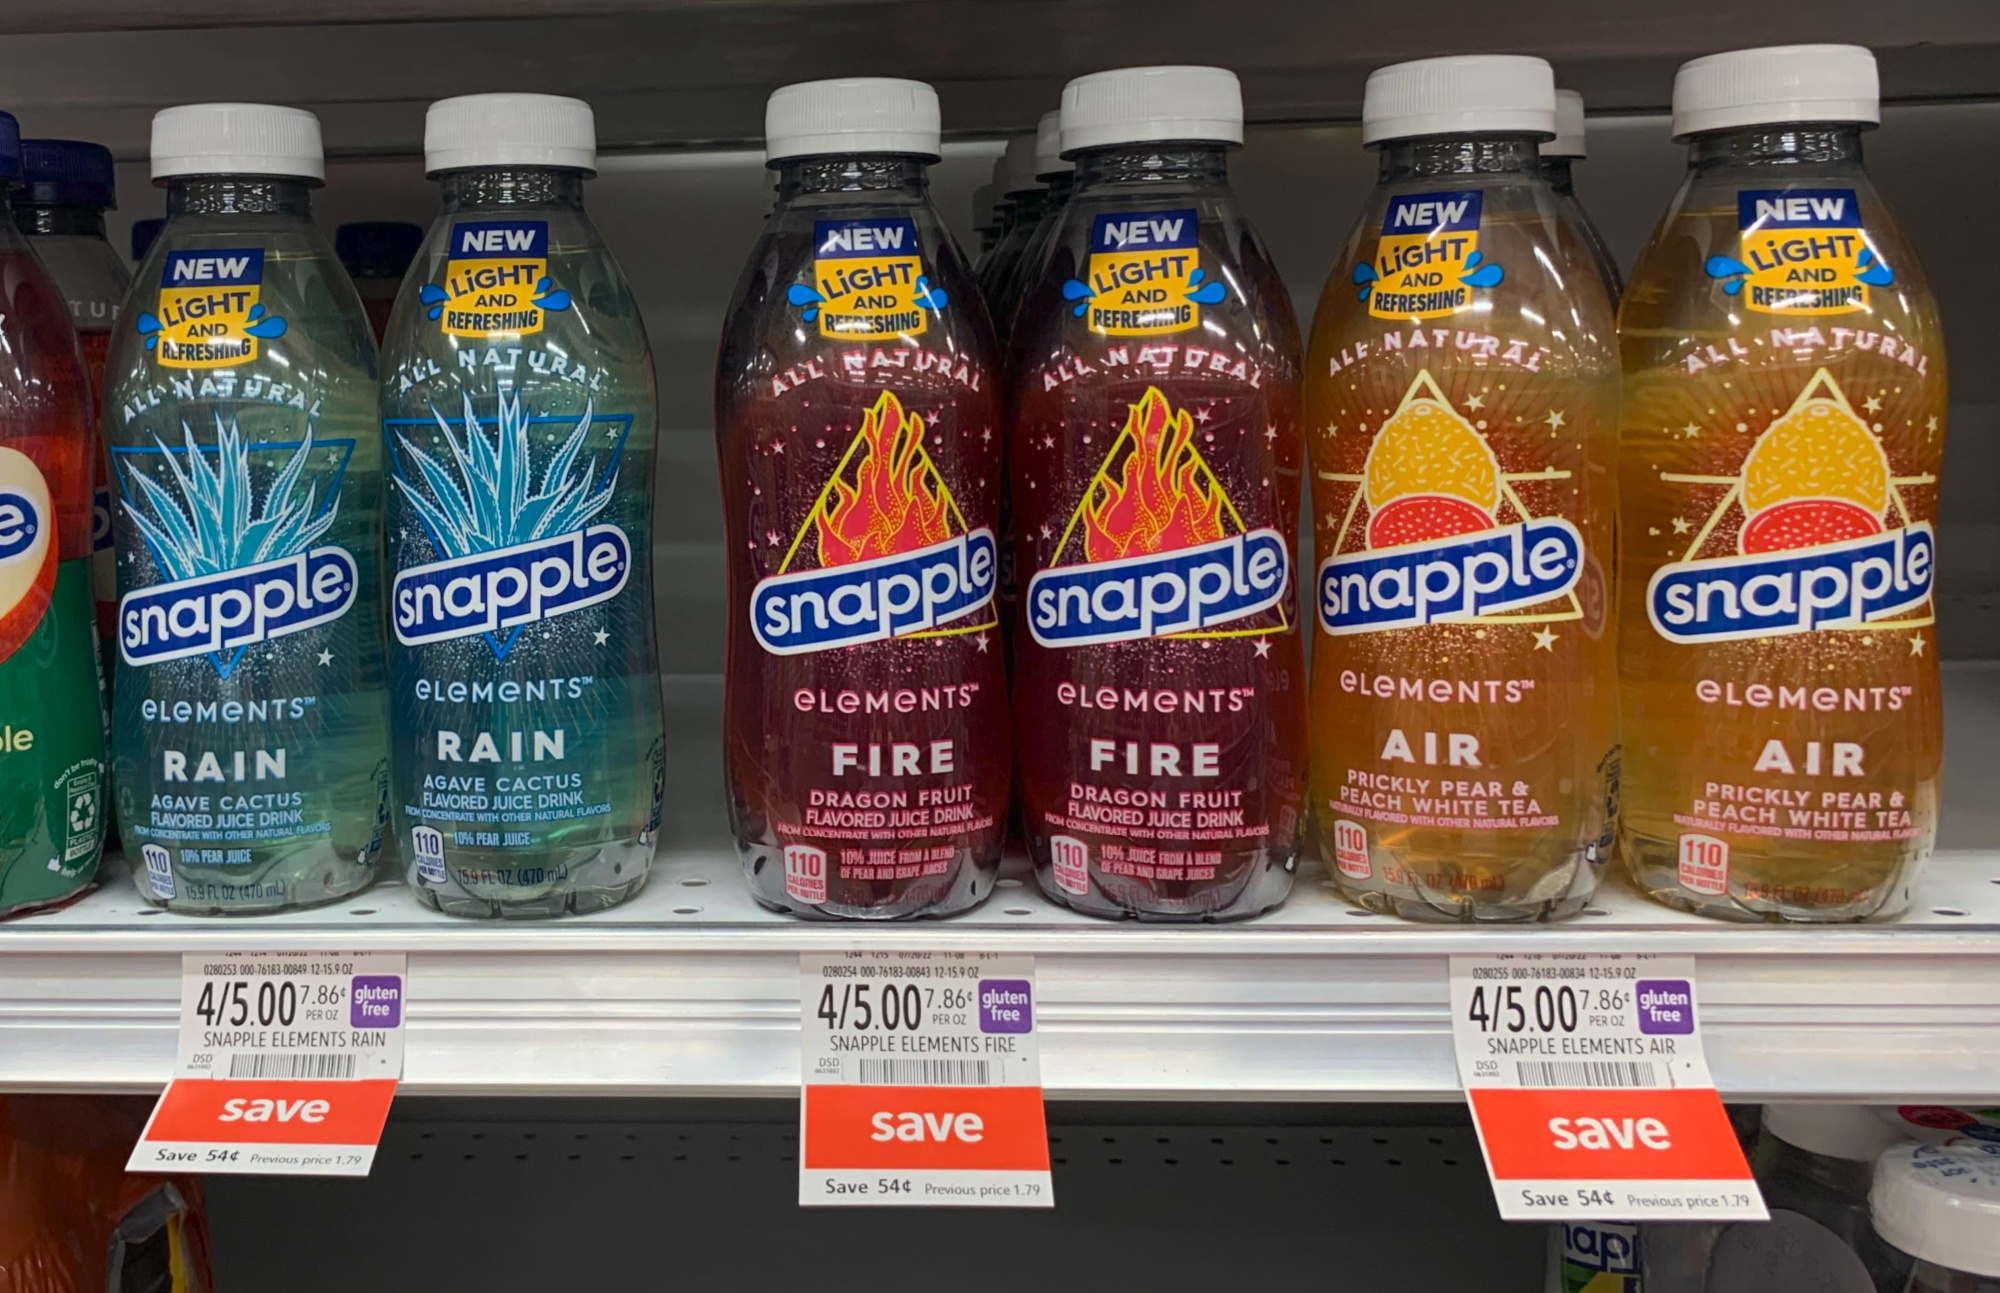 grab-a-discount-on-snapple-elements-at-publix-just-75-per-bottle